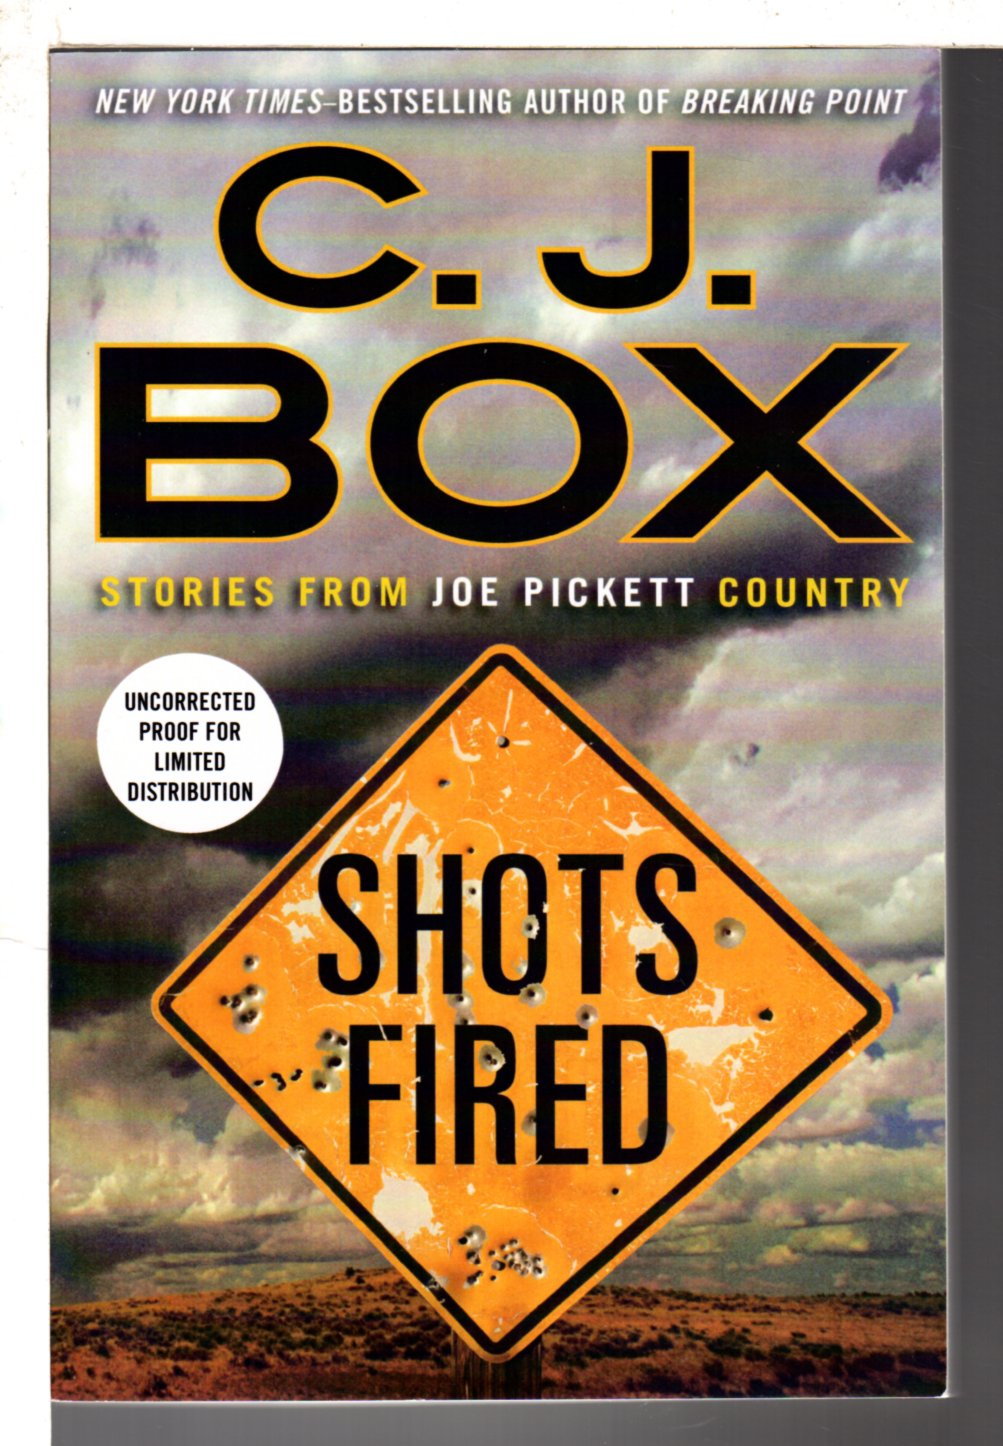 C.J. Box Hardcover Illustrated Fiction Books with Dust Jacket for sale